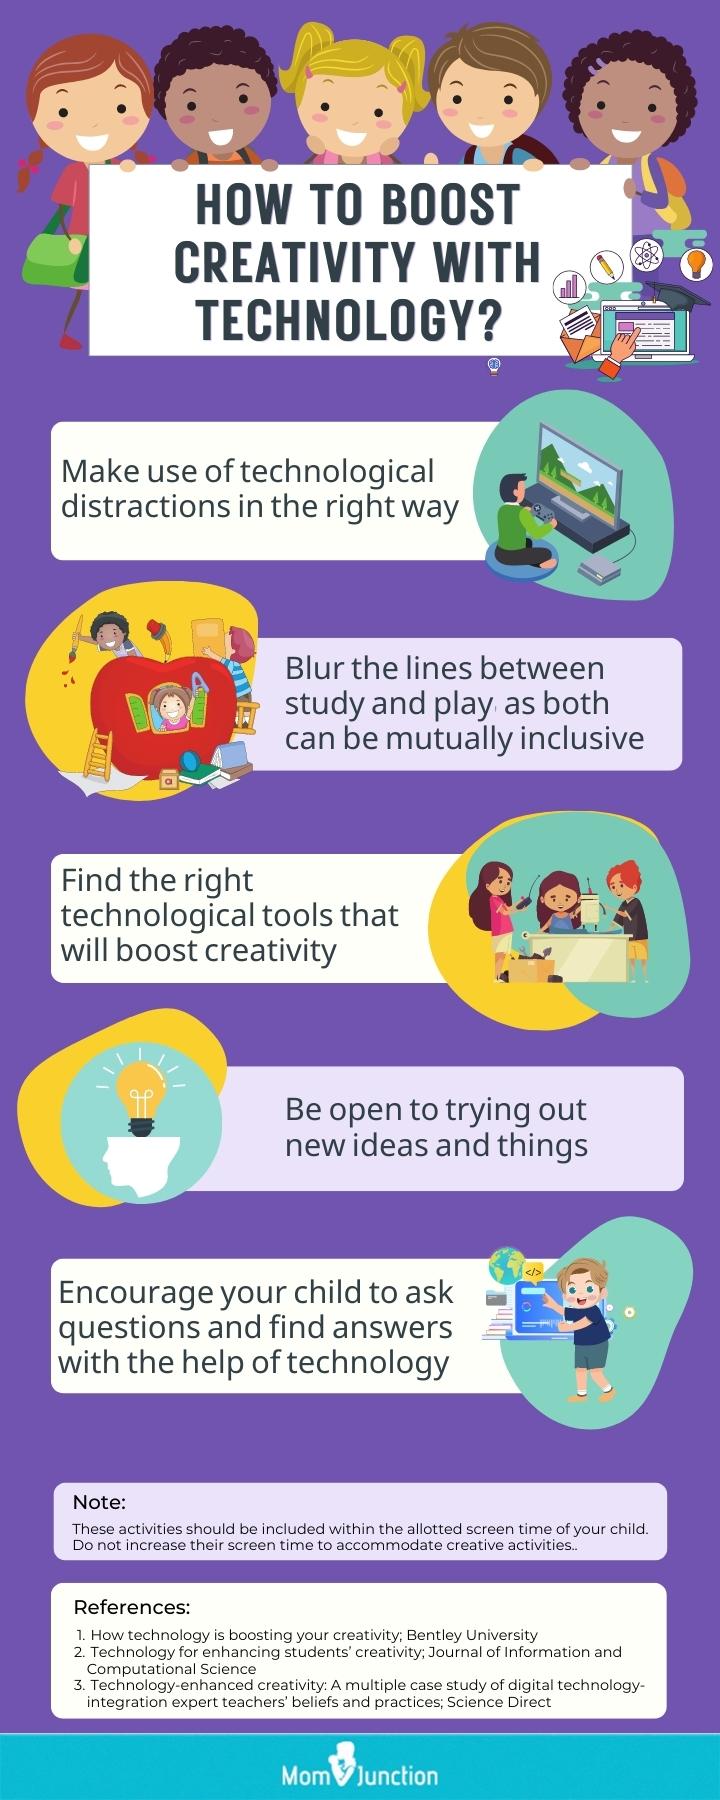 https://www.momjunction.com/wp-content/uploads/2021/12/Infographic-Ways-To-Boost-Your-Childs-Creativity-With-Technology.jpeg